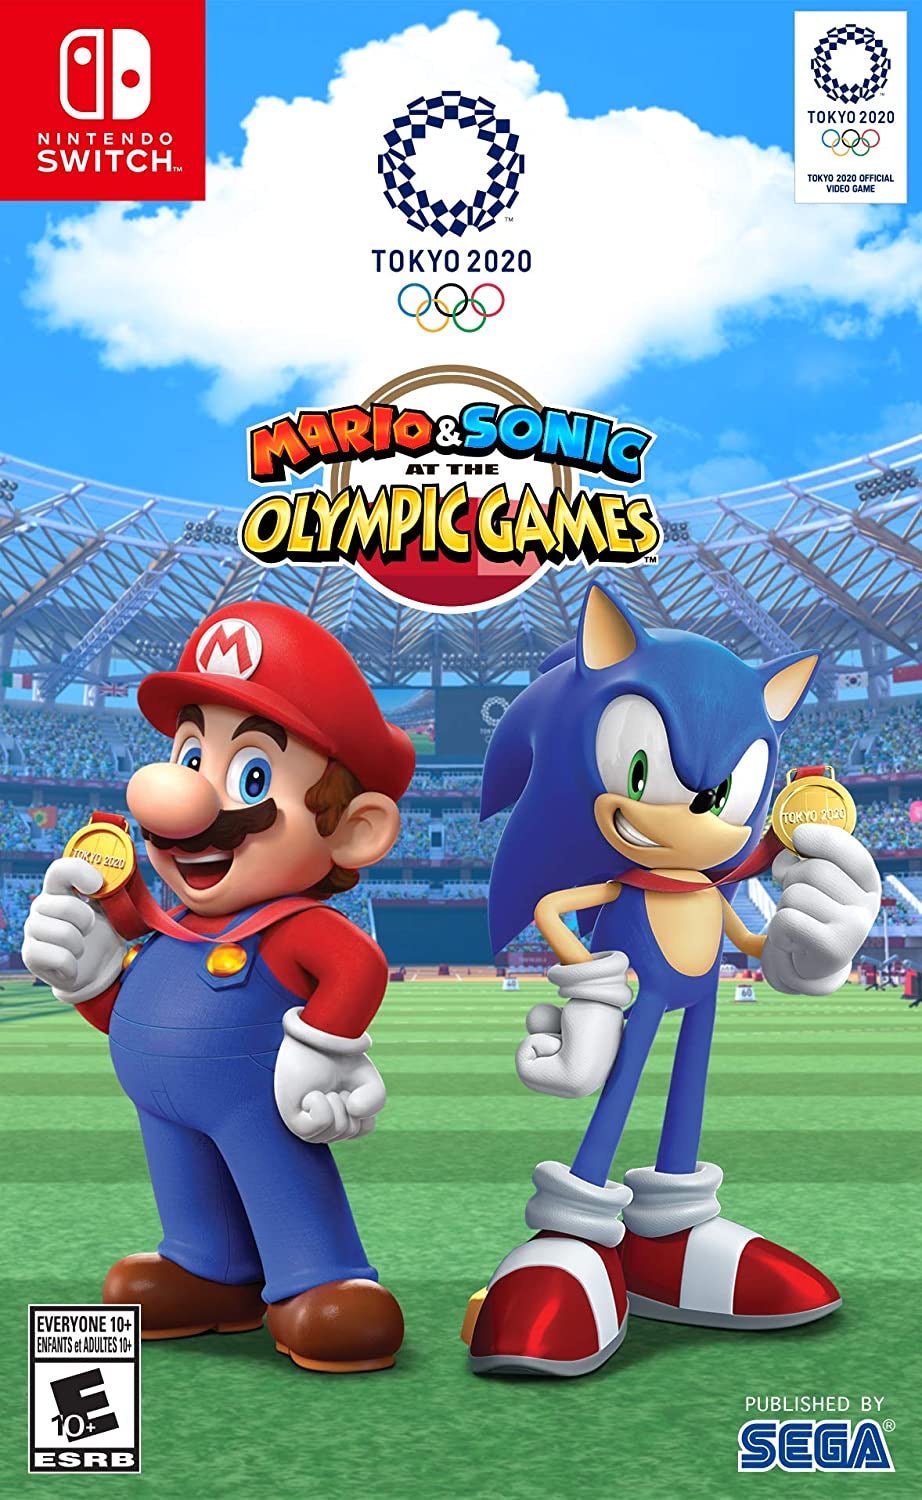 Nintendo Mario & Sonic at the Olympic Games - Level UpNintendoSwitch Video Games010086770094